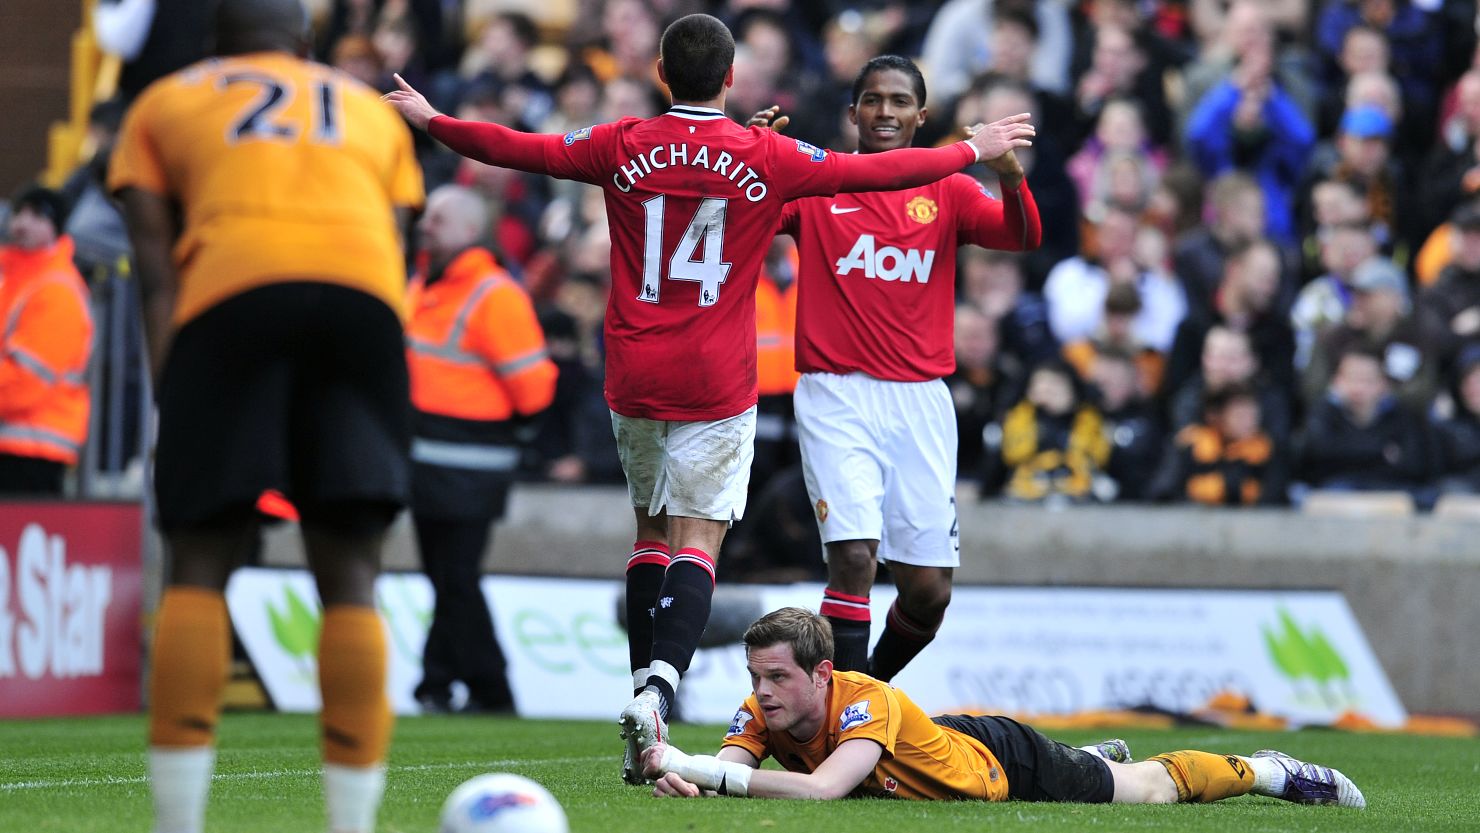 Javier Hernandez celebrates his first goal in Manchester United's 5-0 romp at Wolves.